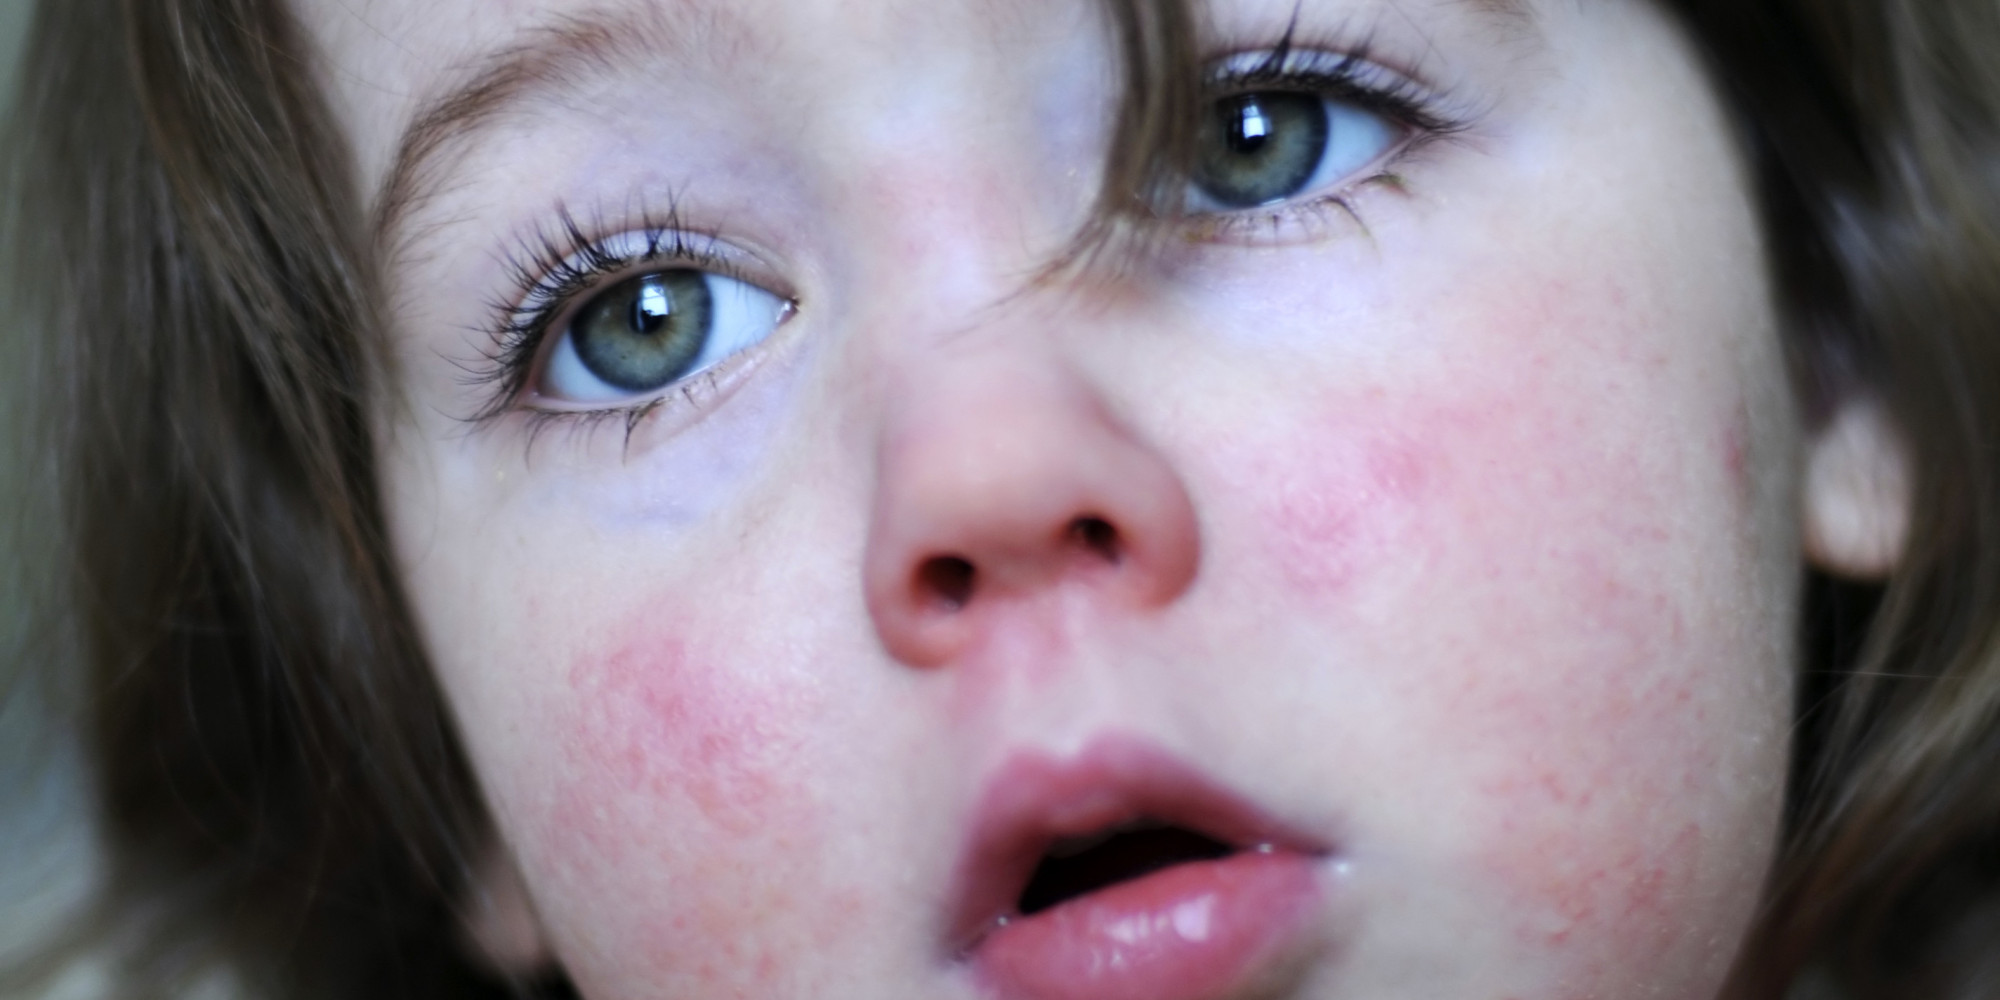 red-rashes-around-eyes-pictures-photos